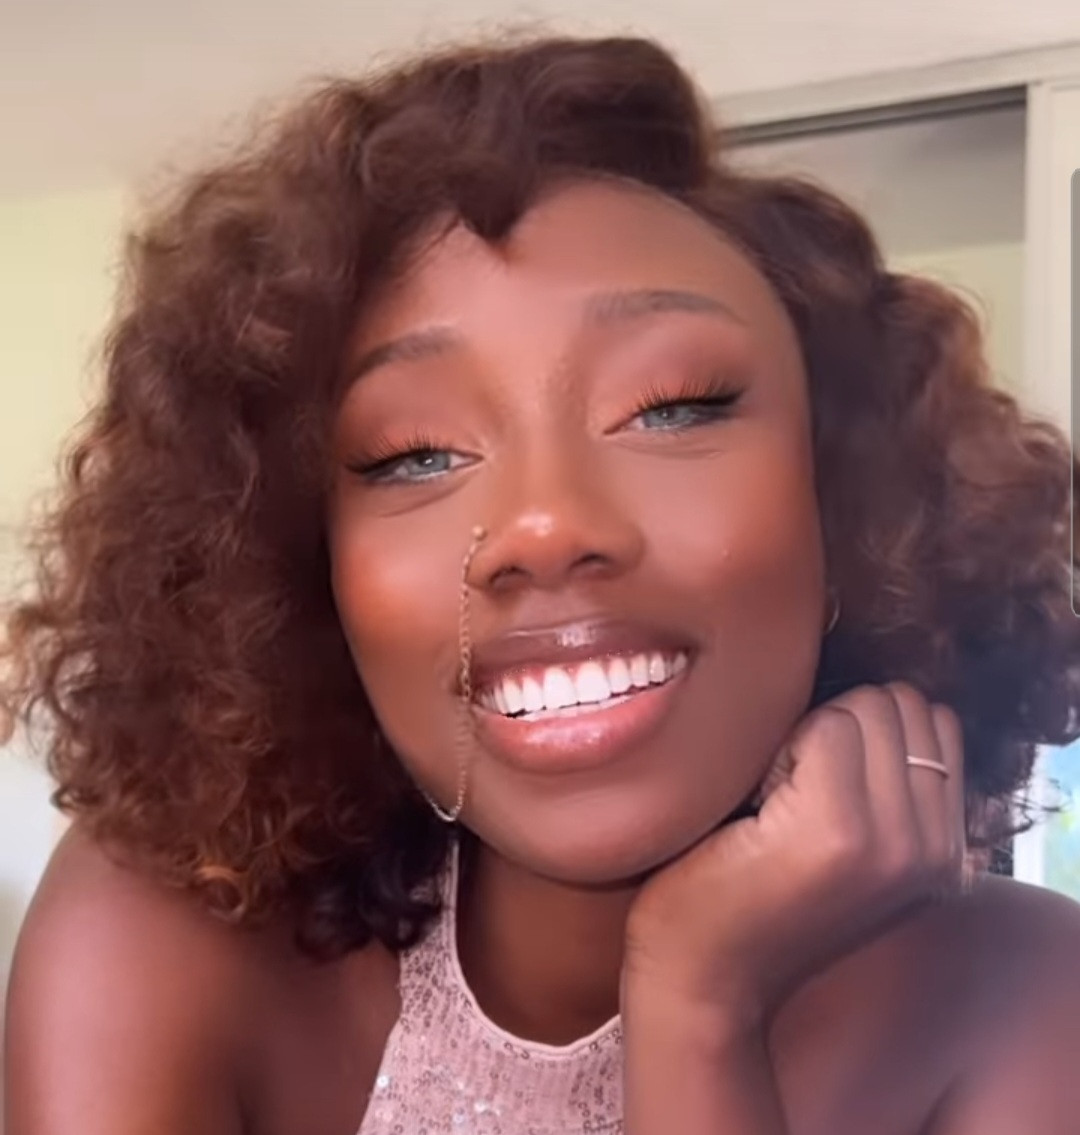 "Are you sure you still want to be famous?" Korra Obidi asks as she shares racist message she received from a troll